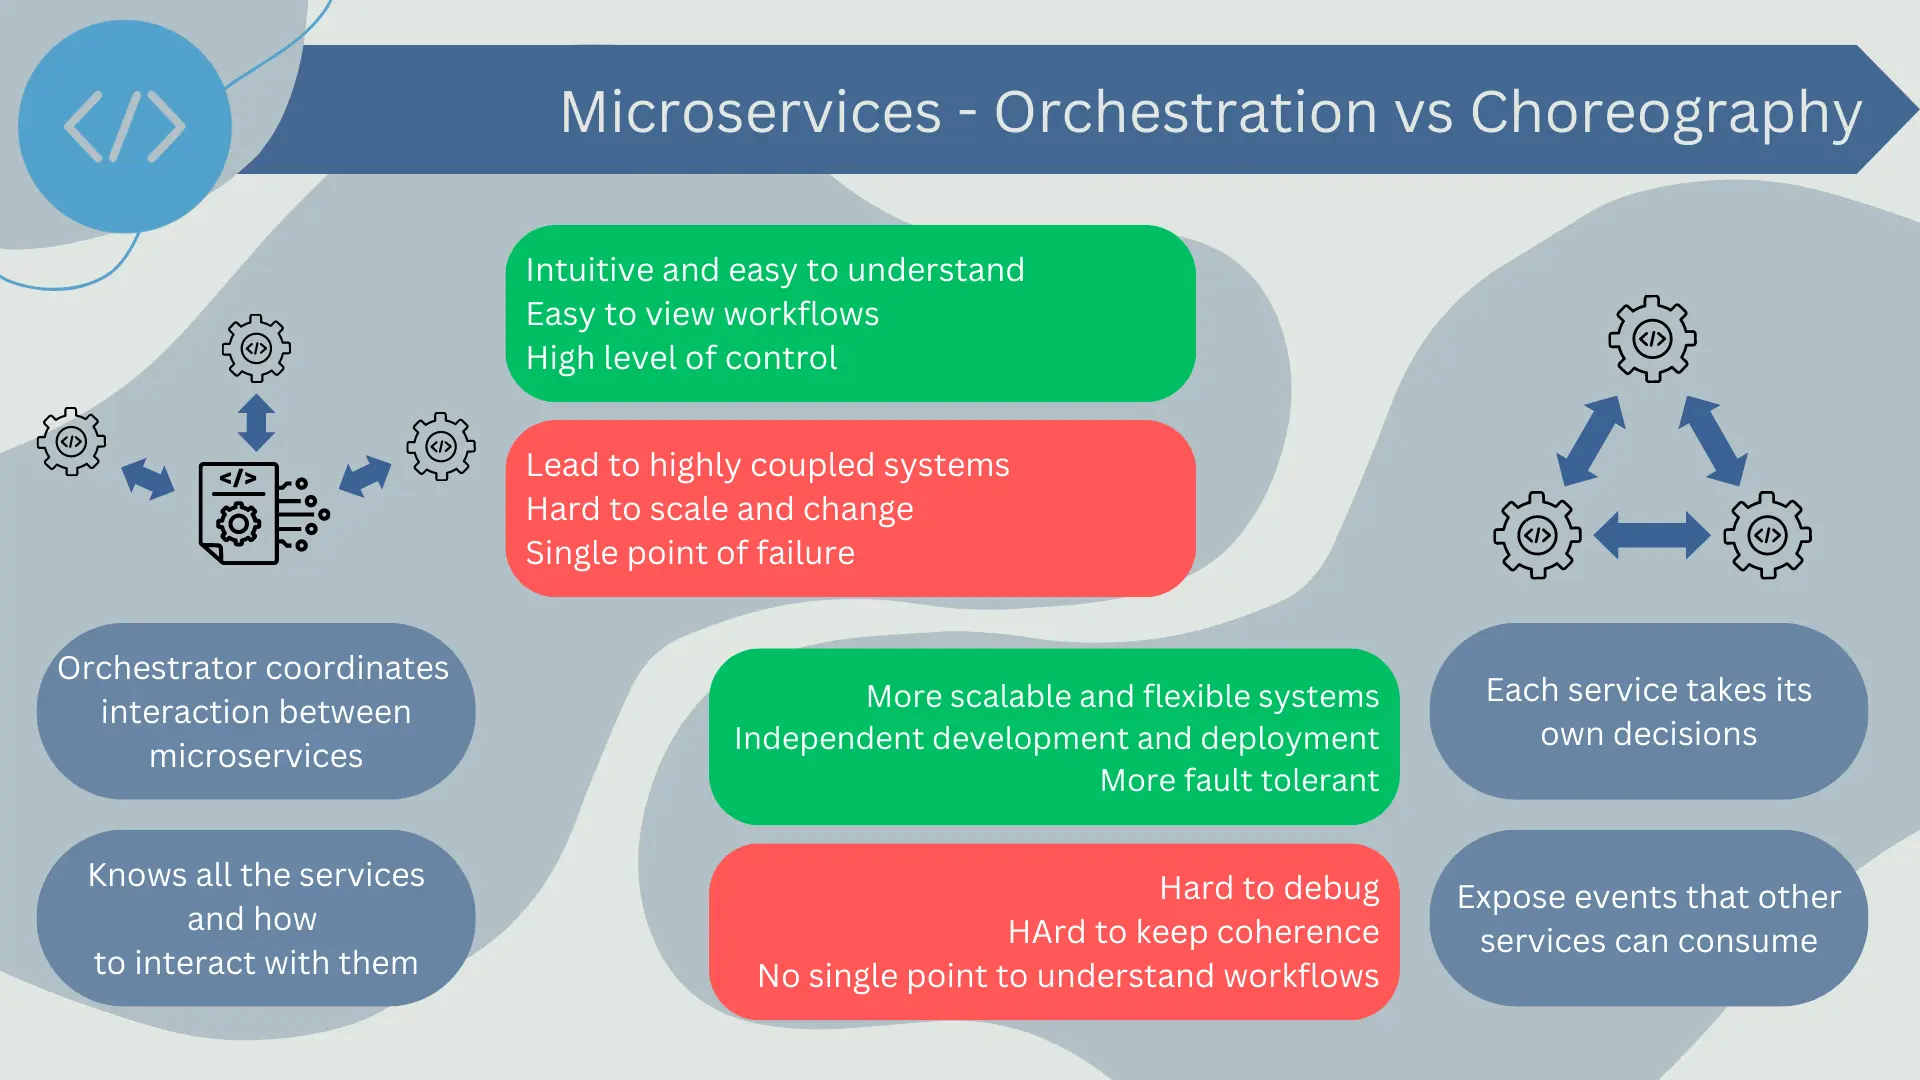 Orchestration VS Choreography in microservices